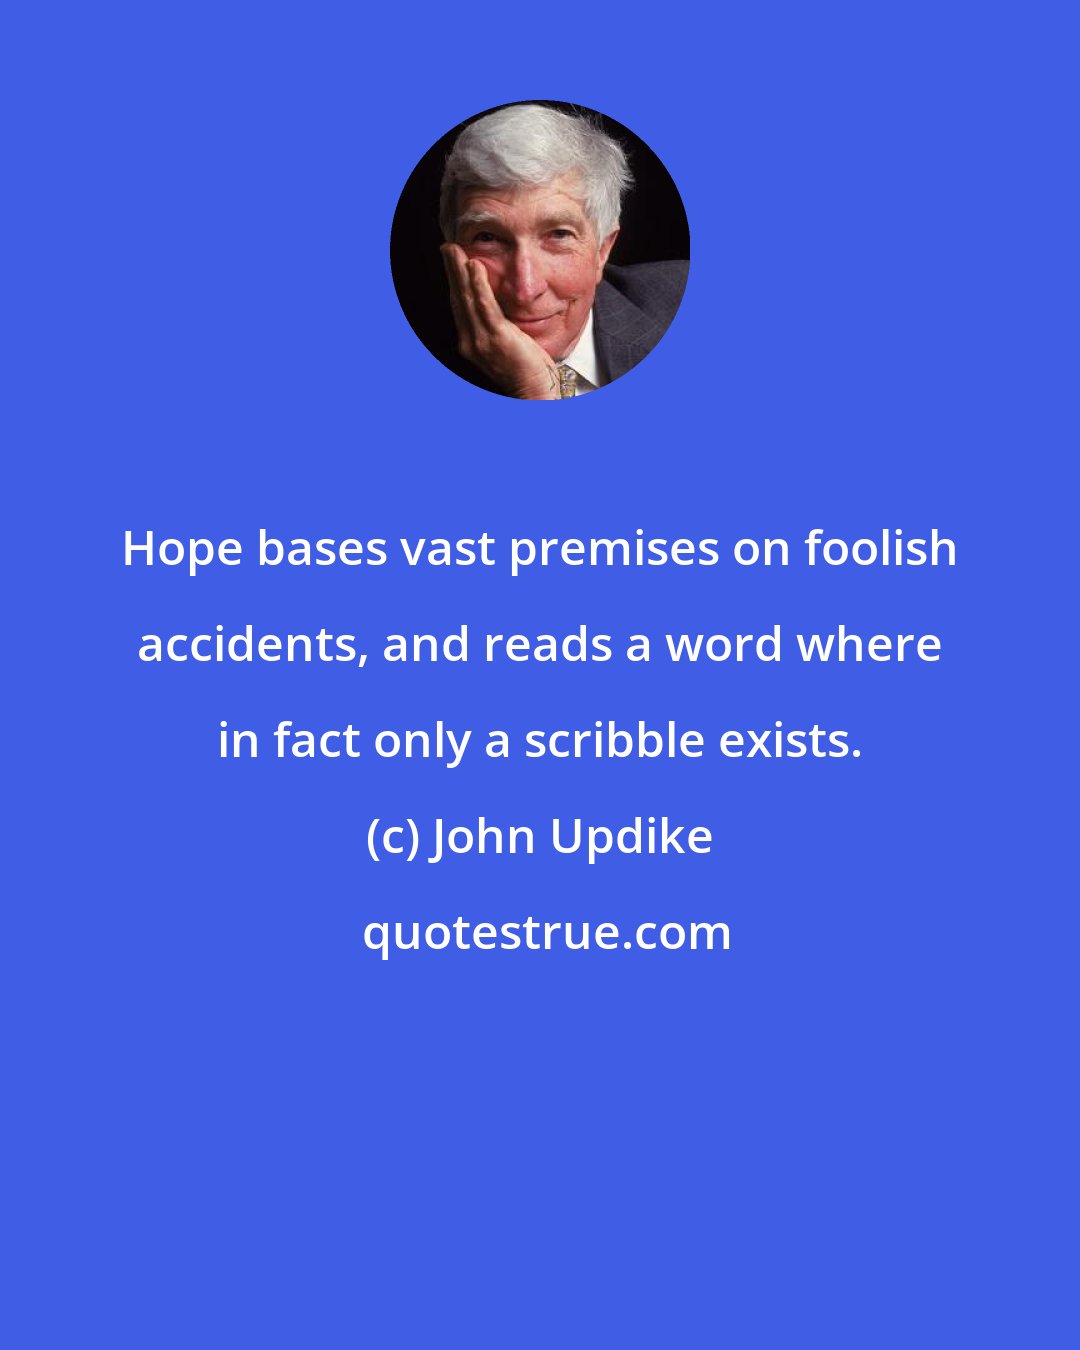 John Updike: Hope bases vast premises on foolish accidents, and reads a word where in fact only a scribble exists.